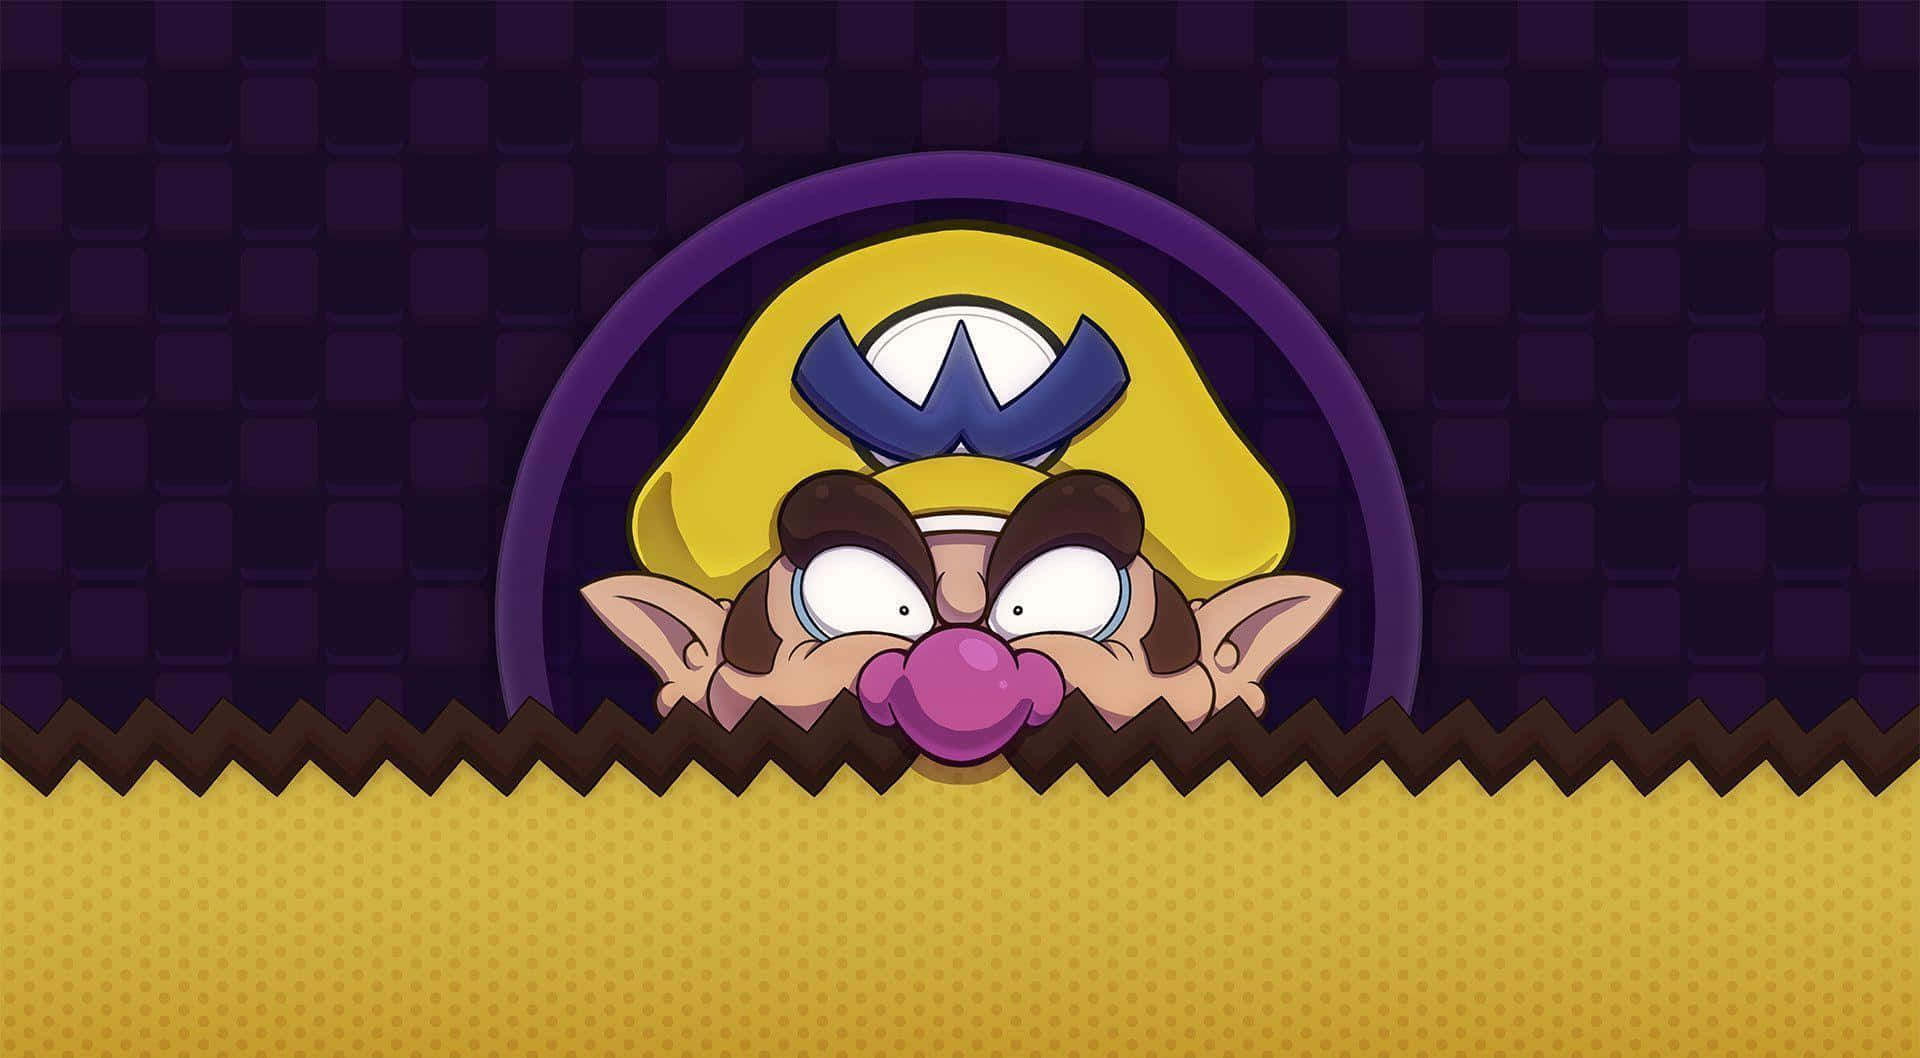 Wario Smirking Mischievously In His Iconic Outfit